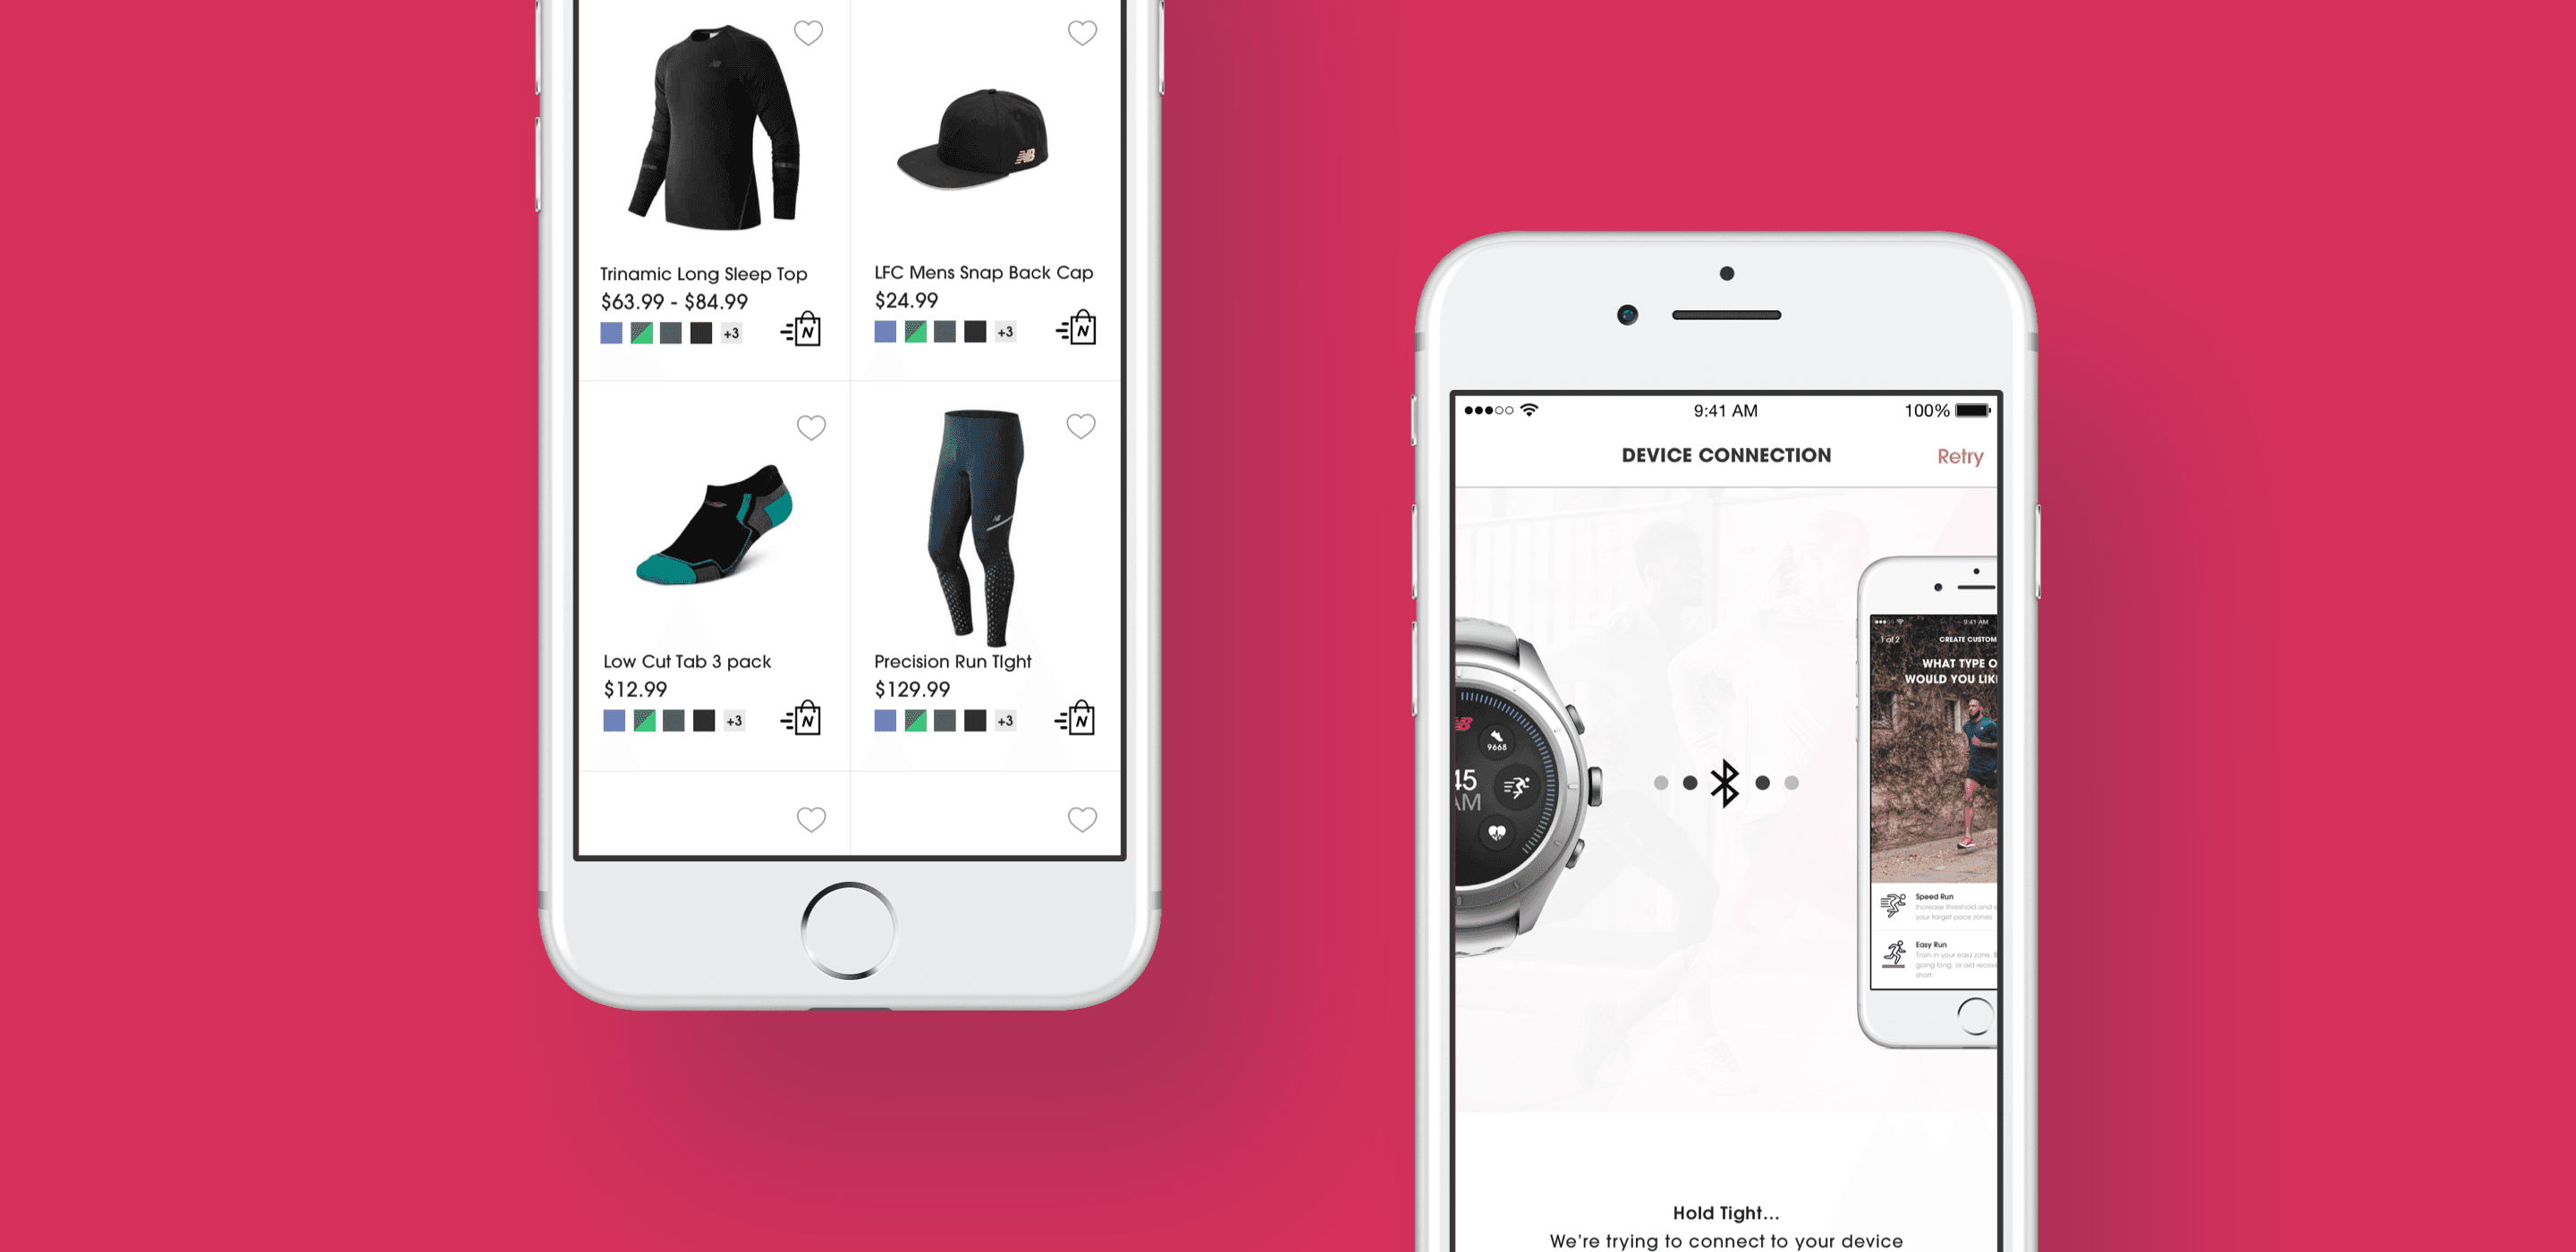 New Balance screenshots of the commerce app, showing product listings and instructions on how to pair devices.